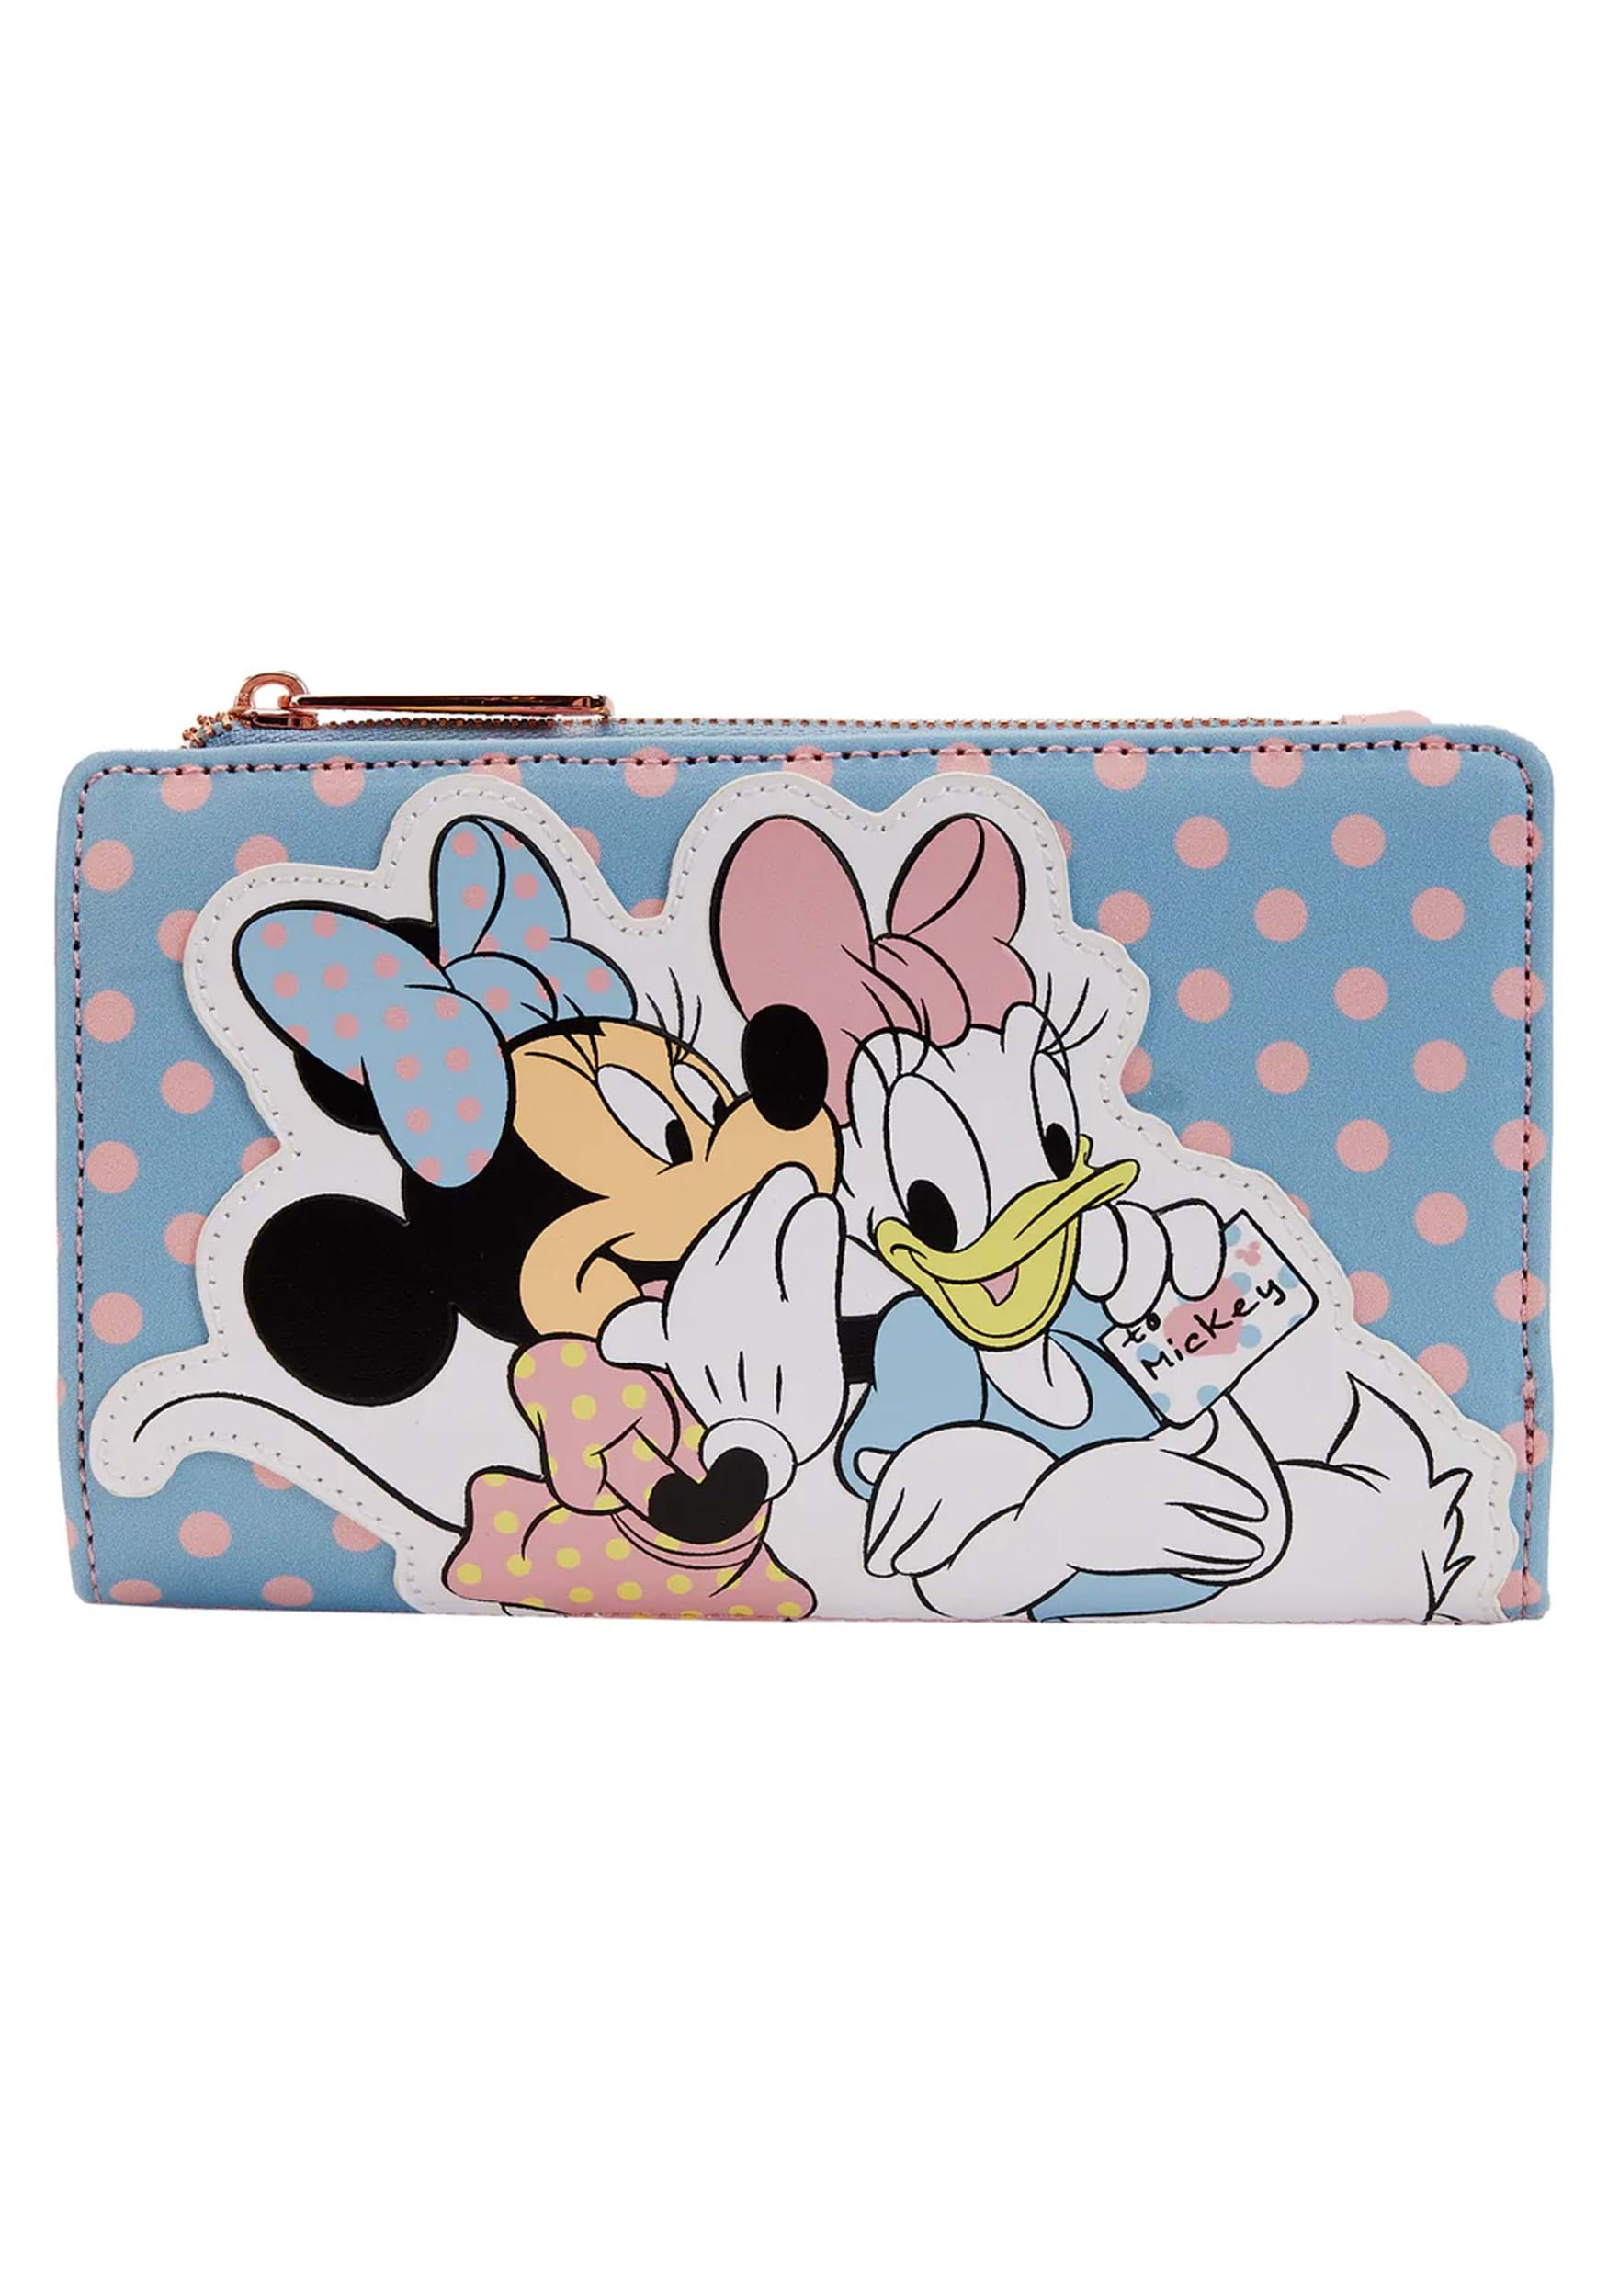 Loungefly Disney Minnie Mouse & Daisy Duck Pastel Color Block Wallet